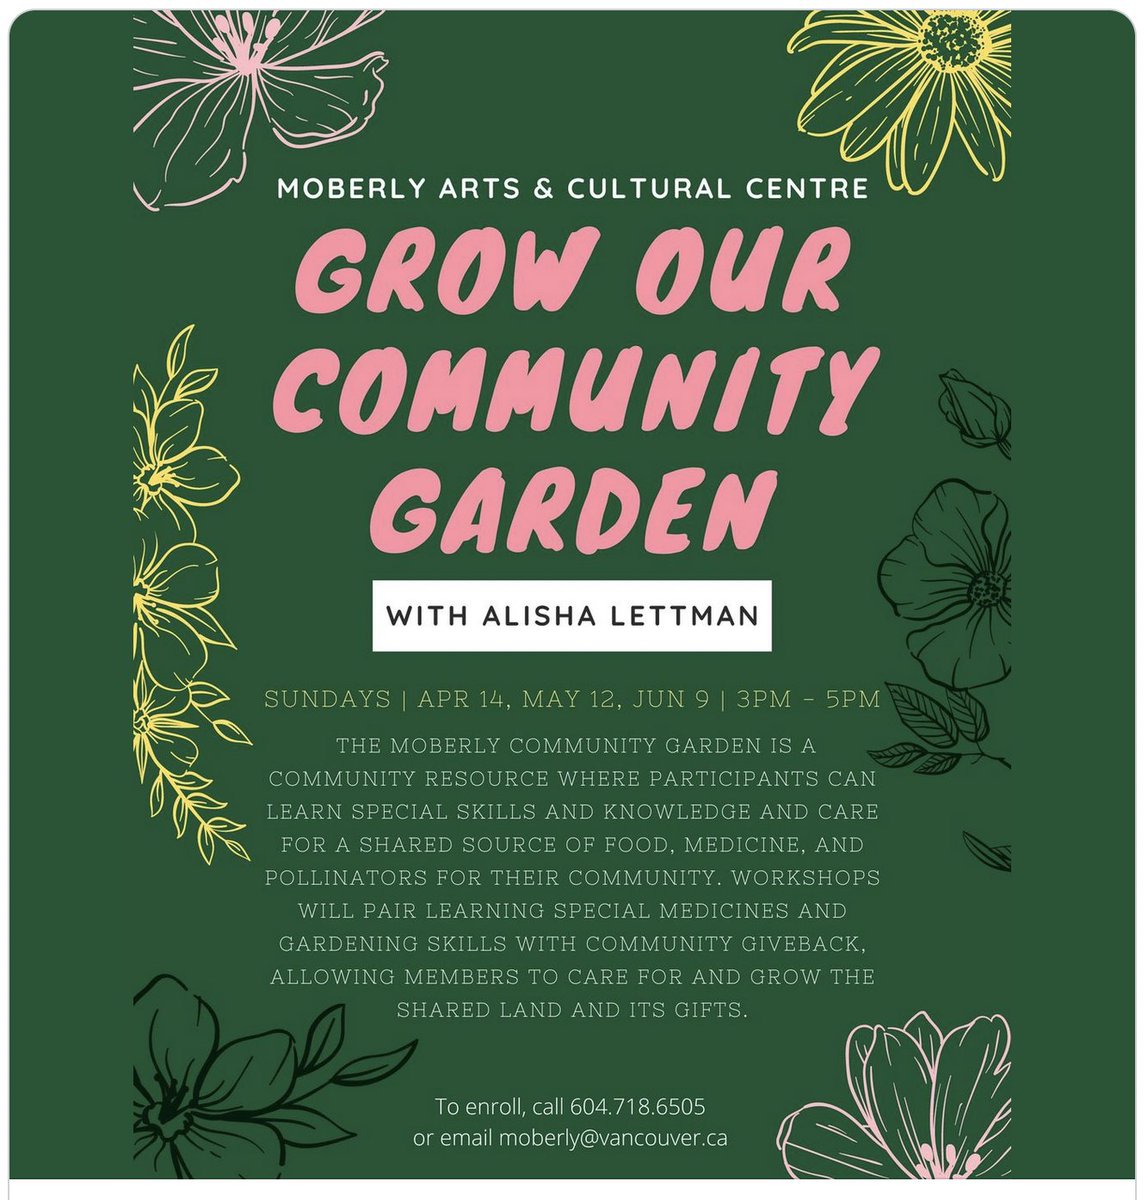 Grow your Community Garden workshops , Sundays, May 12 and June 9, Moberly Arts & Cultural Centre, 7646 Prince Albert St. To enroll call 604-718=6505 or email moberly@vancouver.ca

#gardening #communitygarden #pollintators #foodsecurity #naturalmedicine